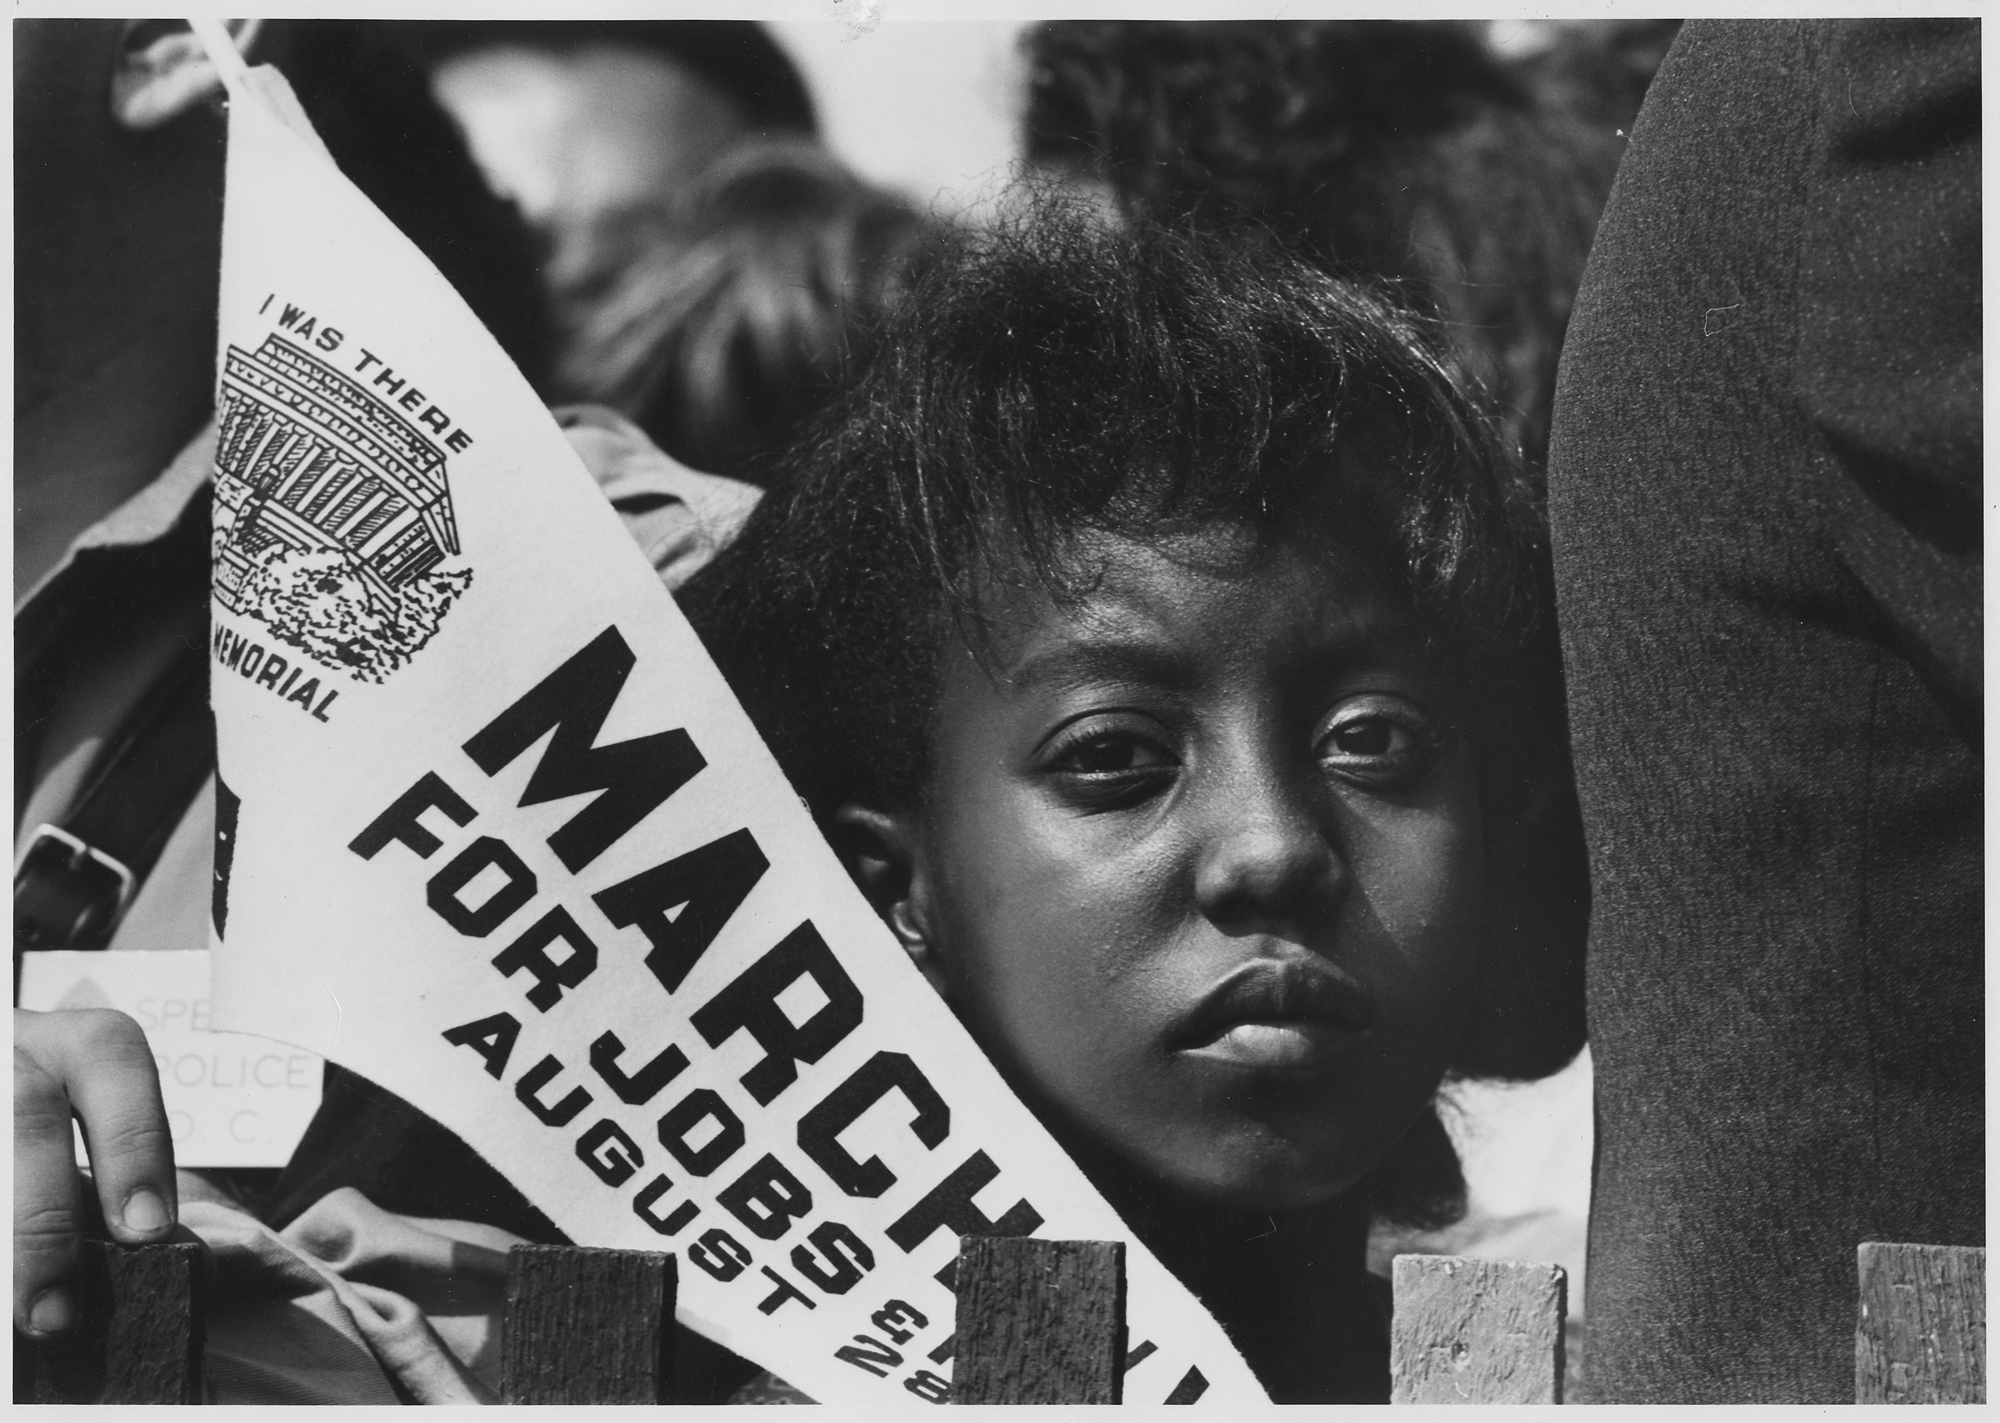 A young woman at the Civil Rights March on Washington, D.C. (1963) Photo credit: National Archives at College Park.